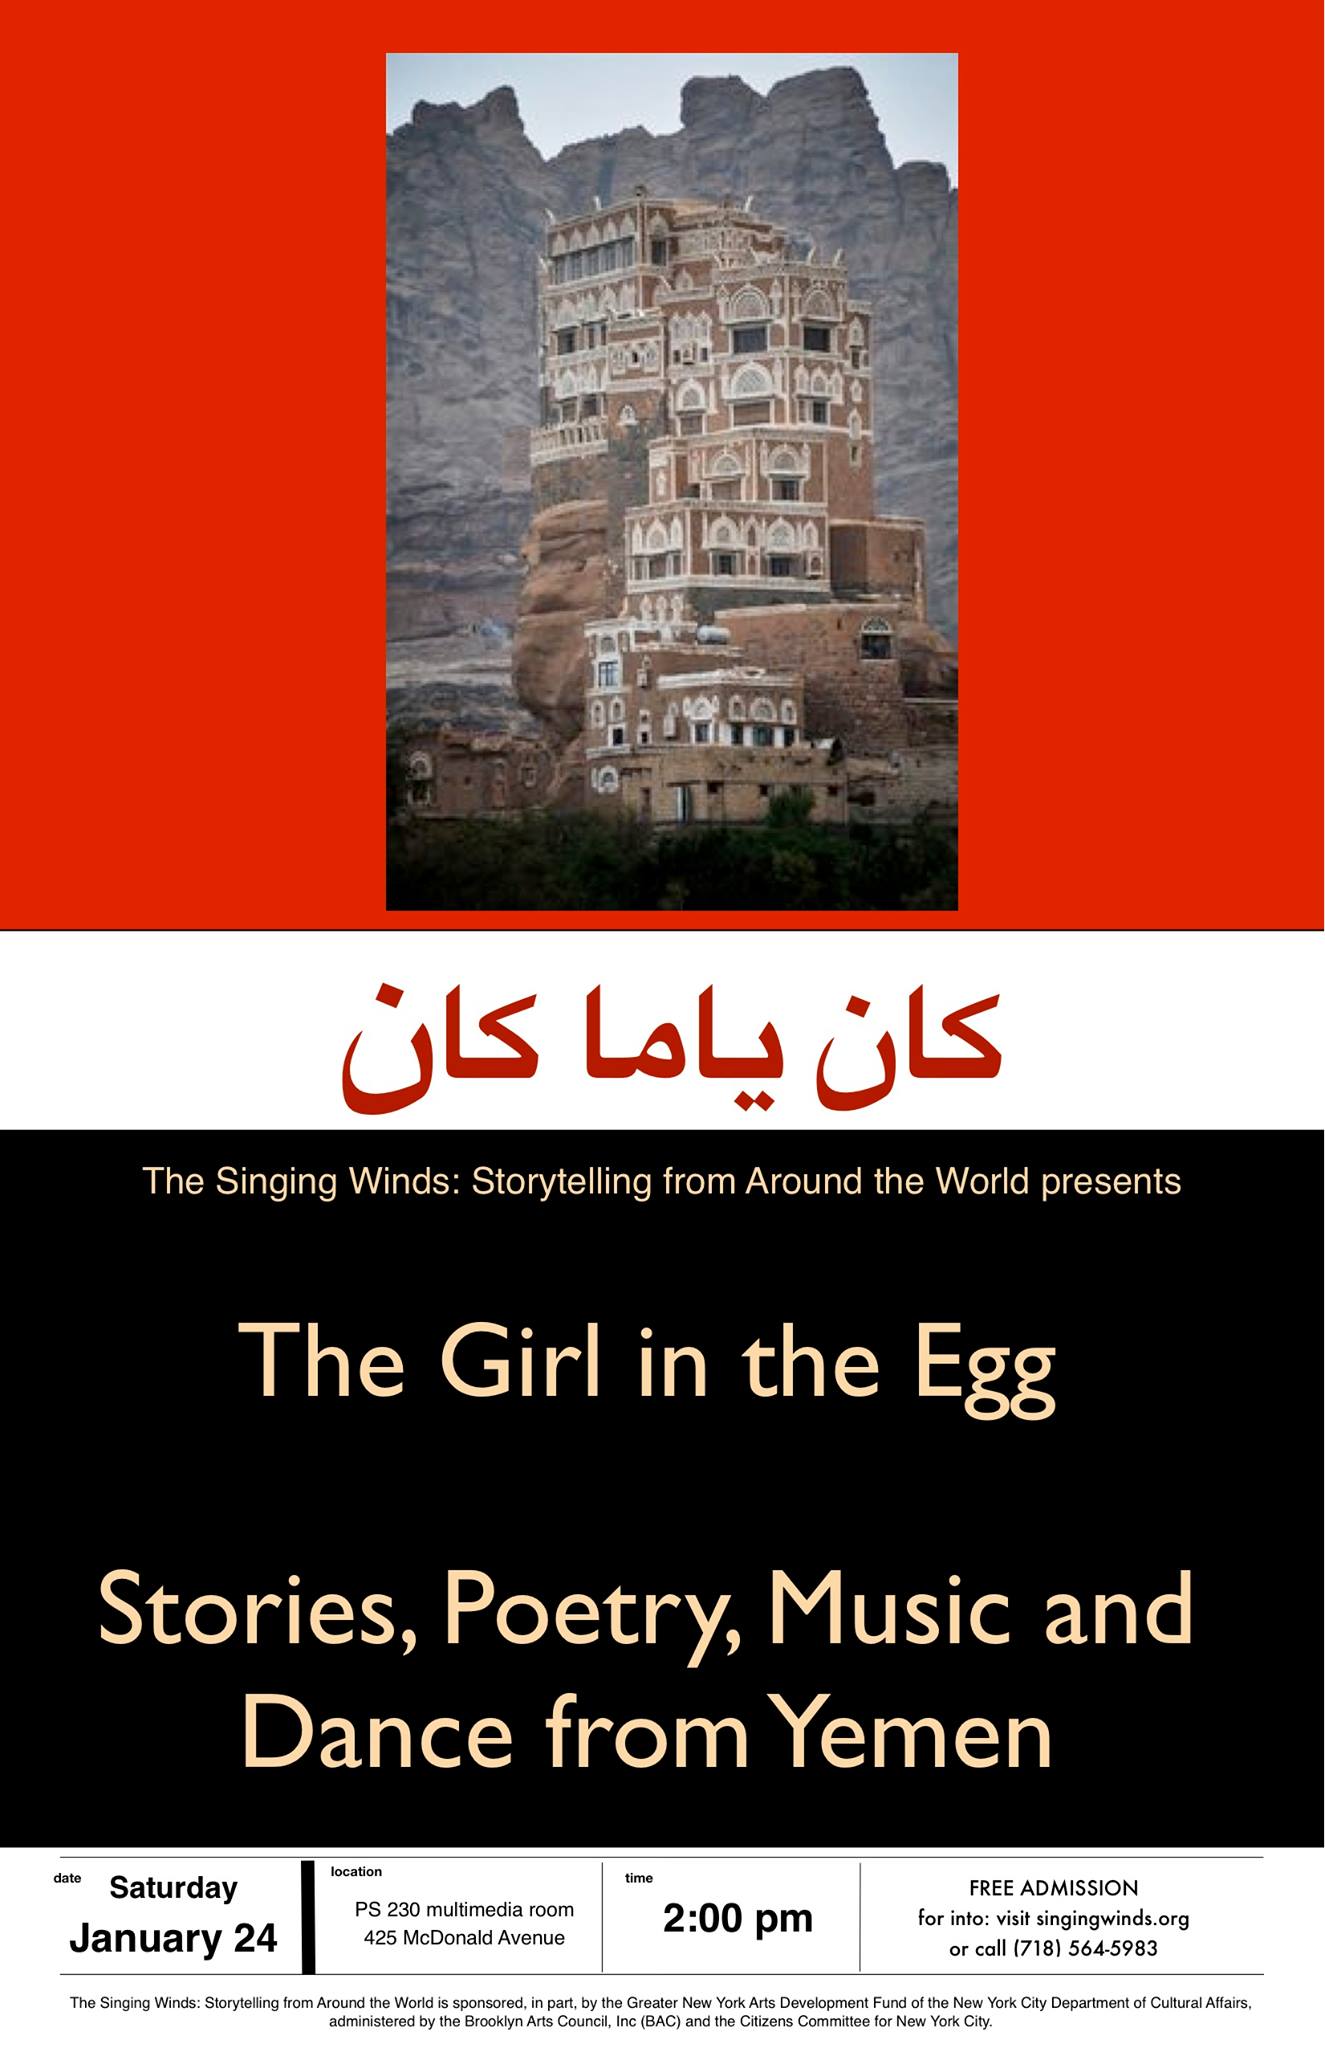 The Singing Winds Presents Afternoon Of Yemeni Stories, Poetry, Music, and Dance At PS 230 This Saturday